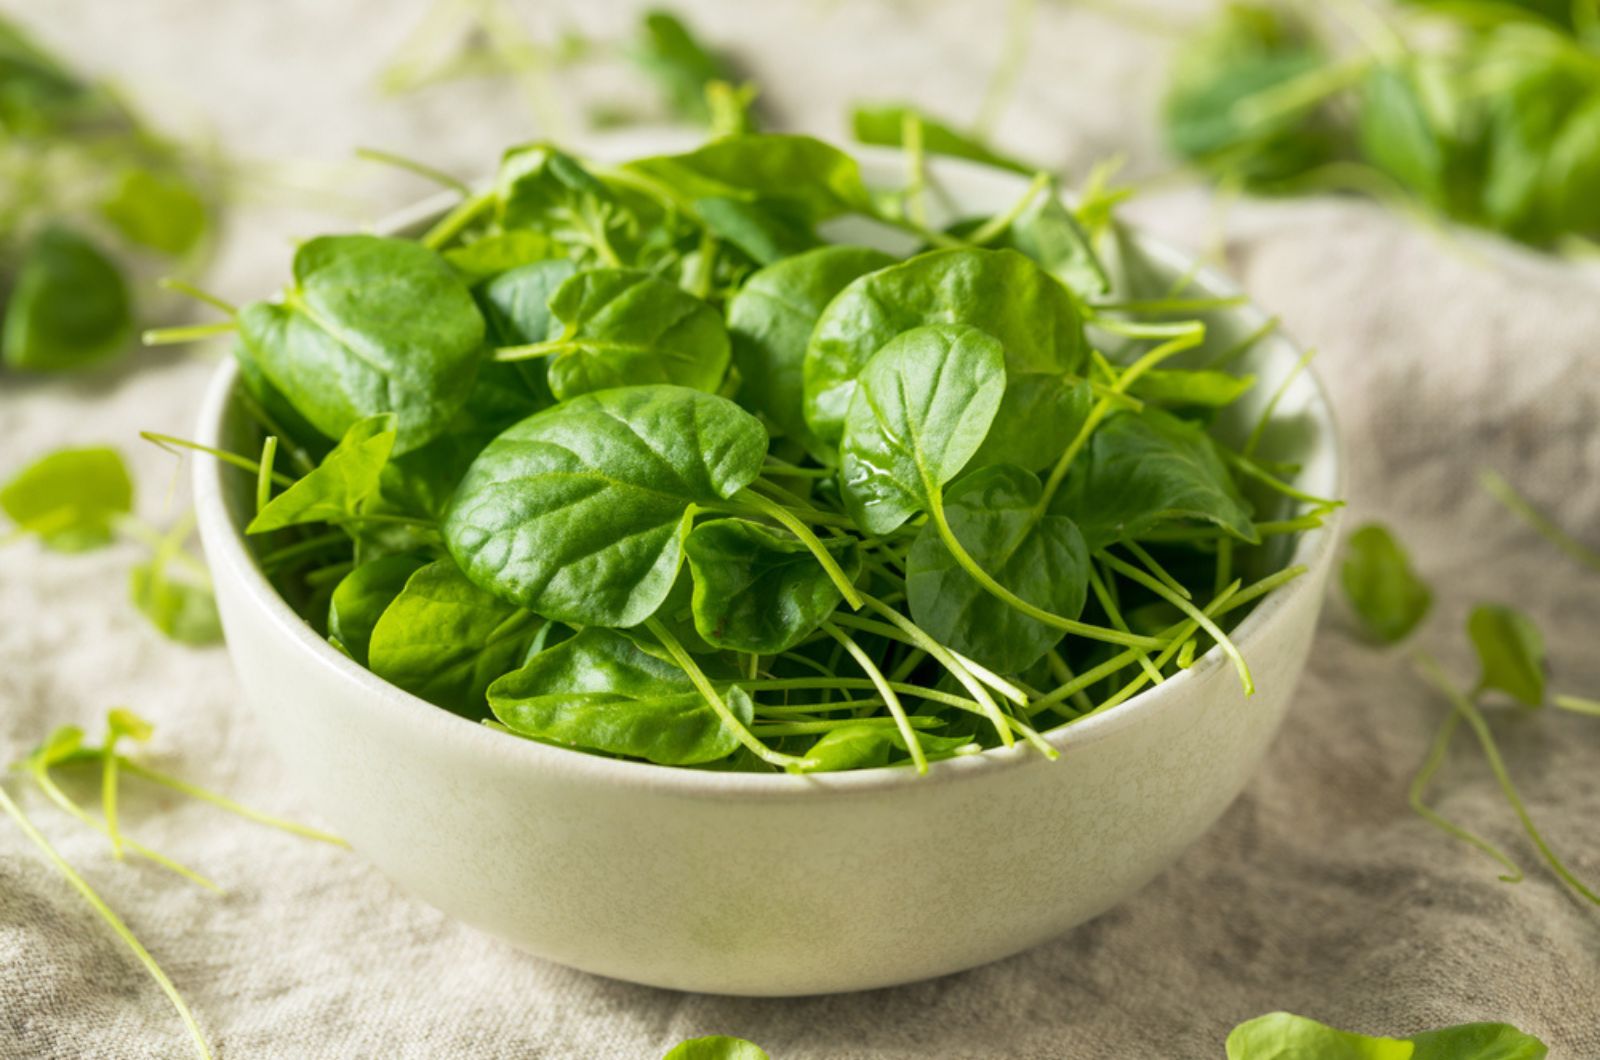 Watercress in the bowl